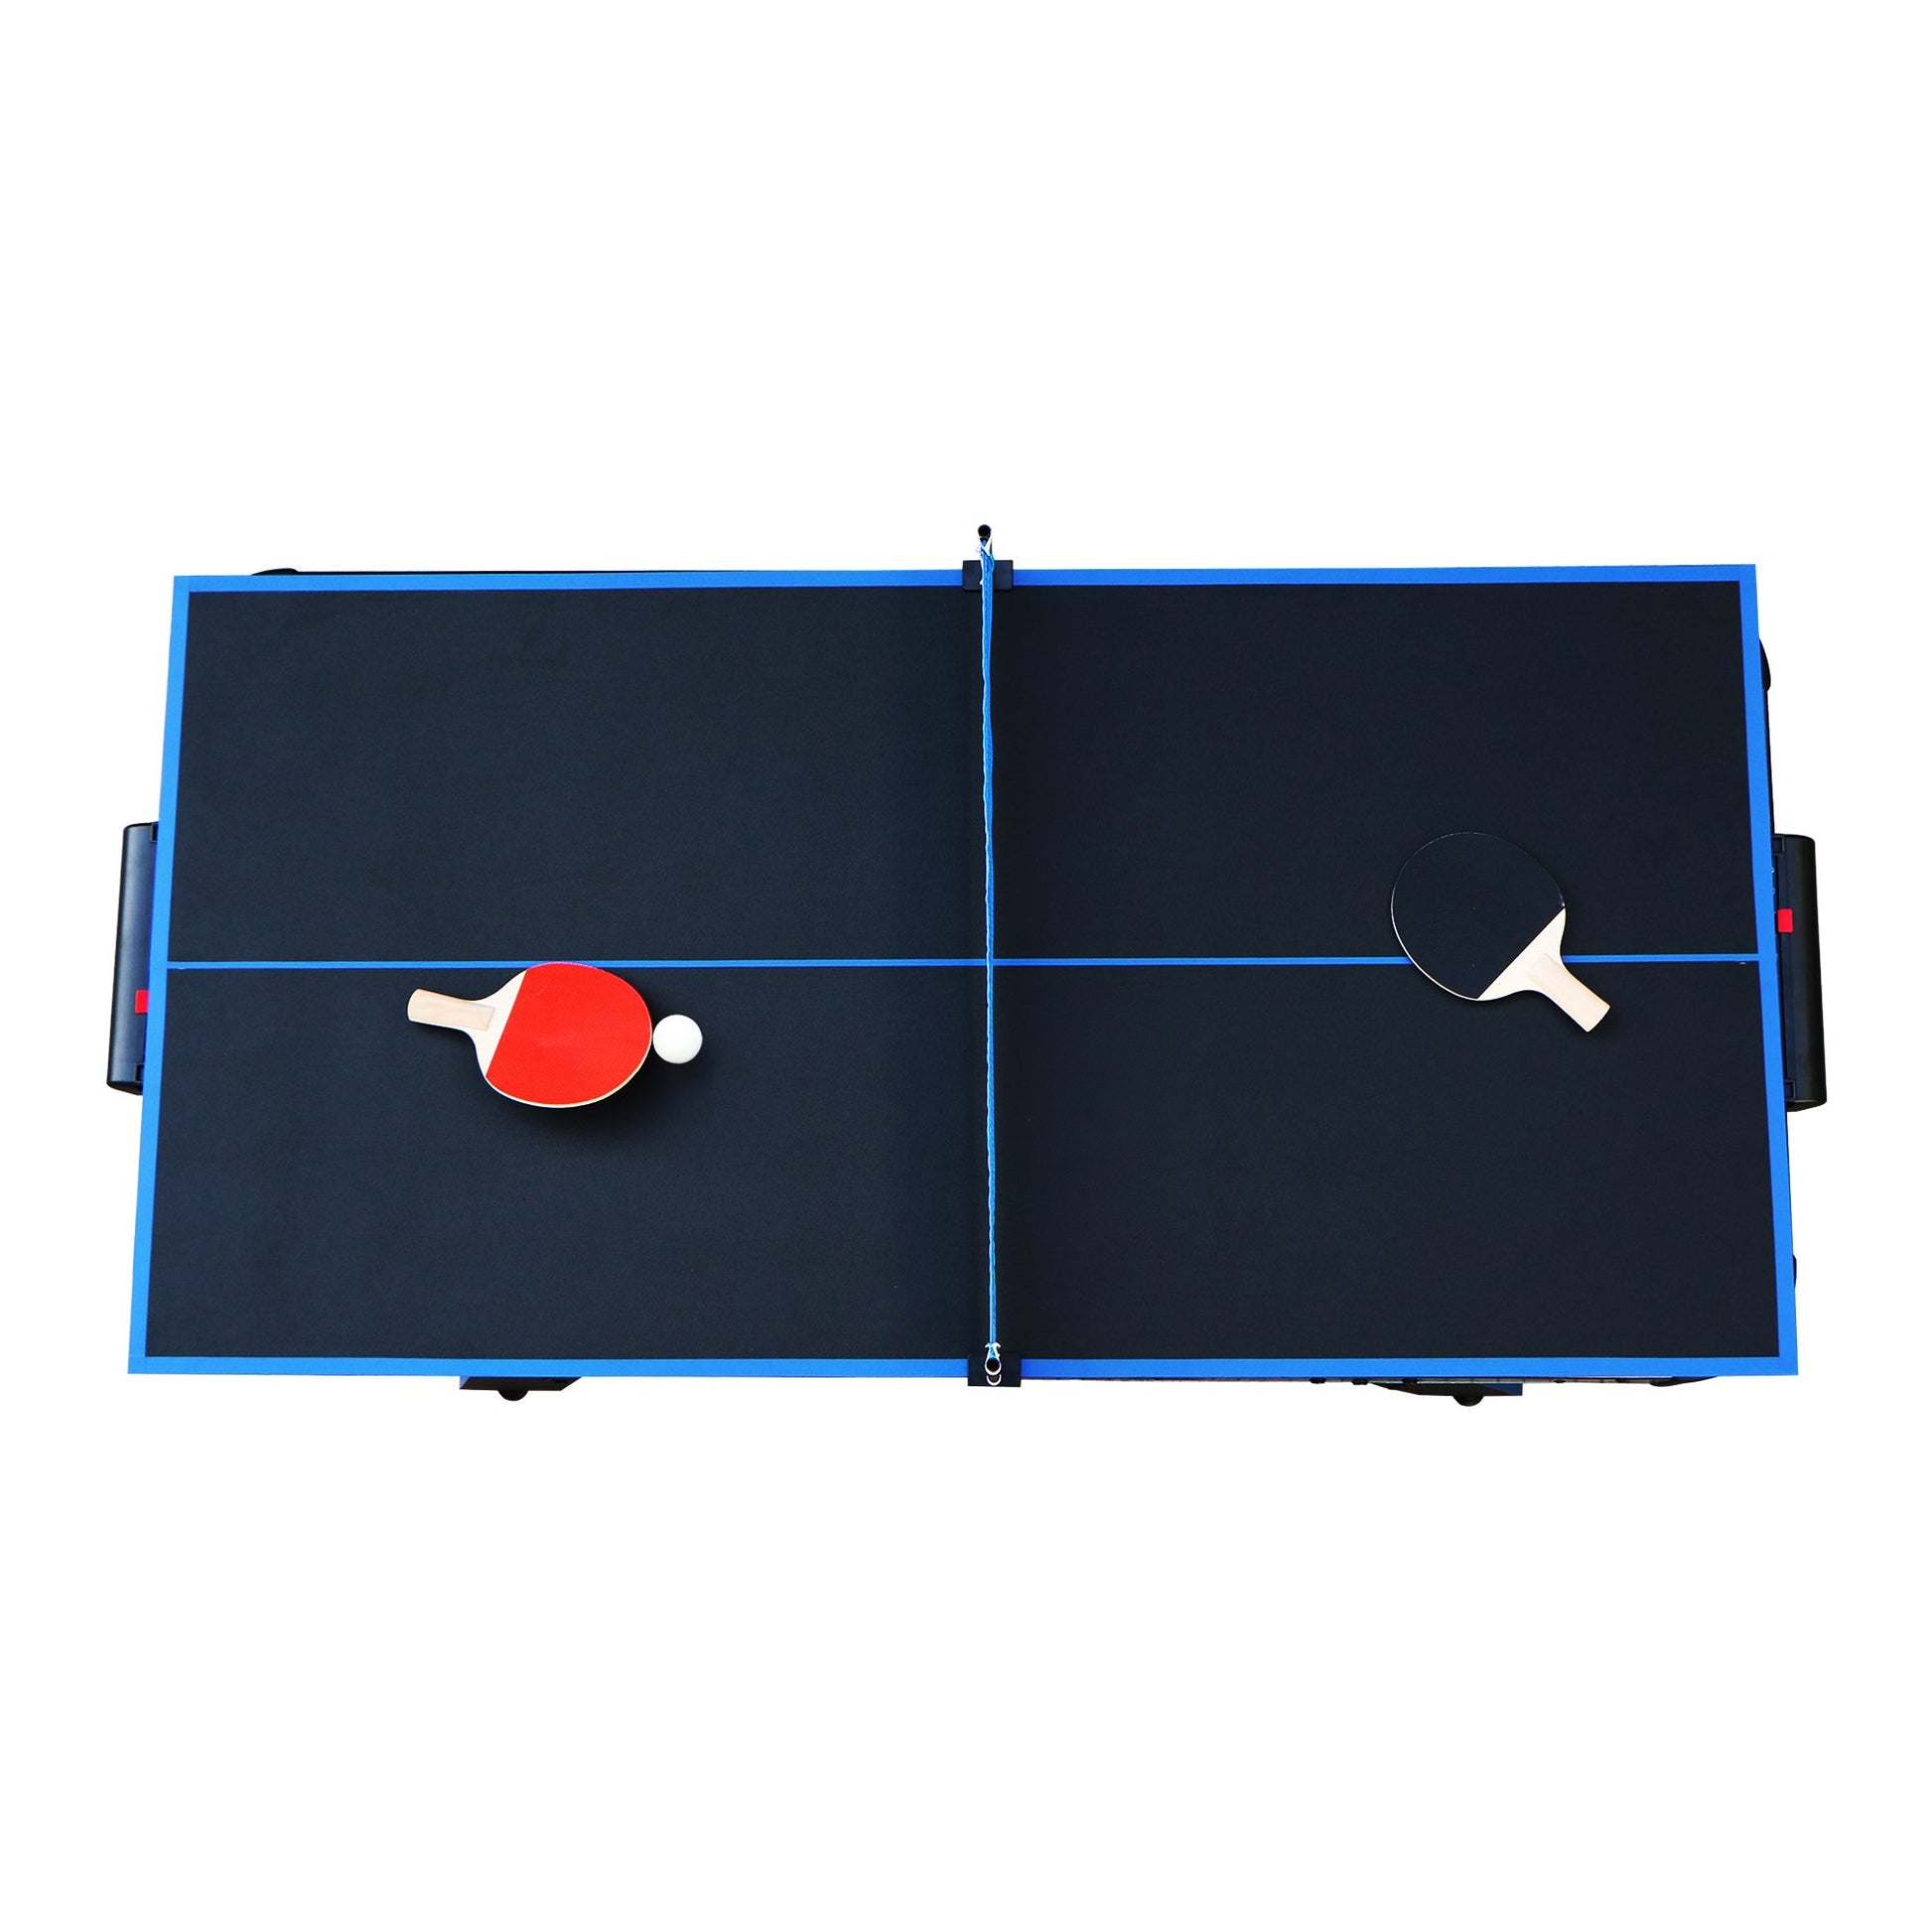 Hathaway Bandit 2 in 1 Multi Game Table 5ft - Gaming Blaze